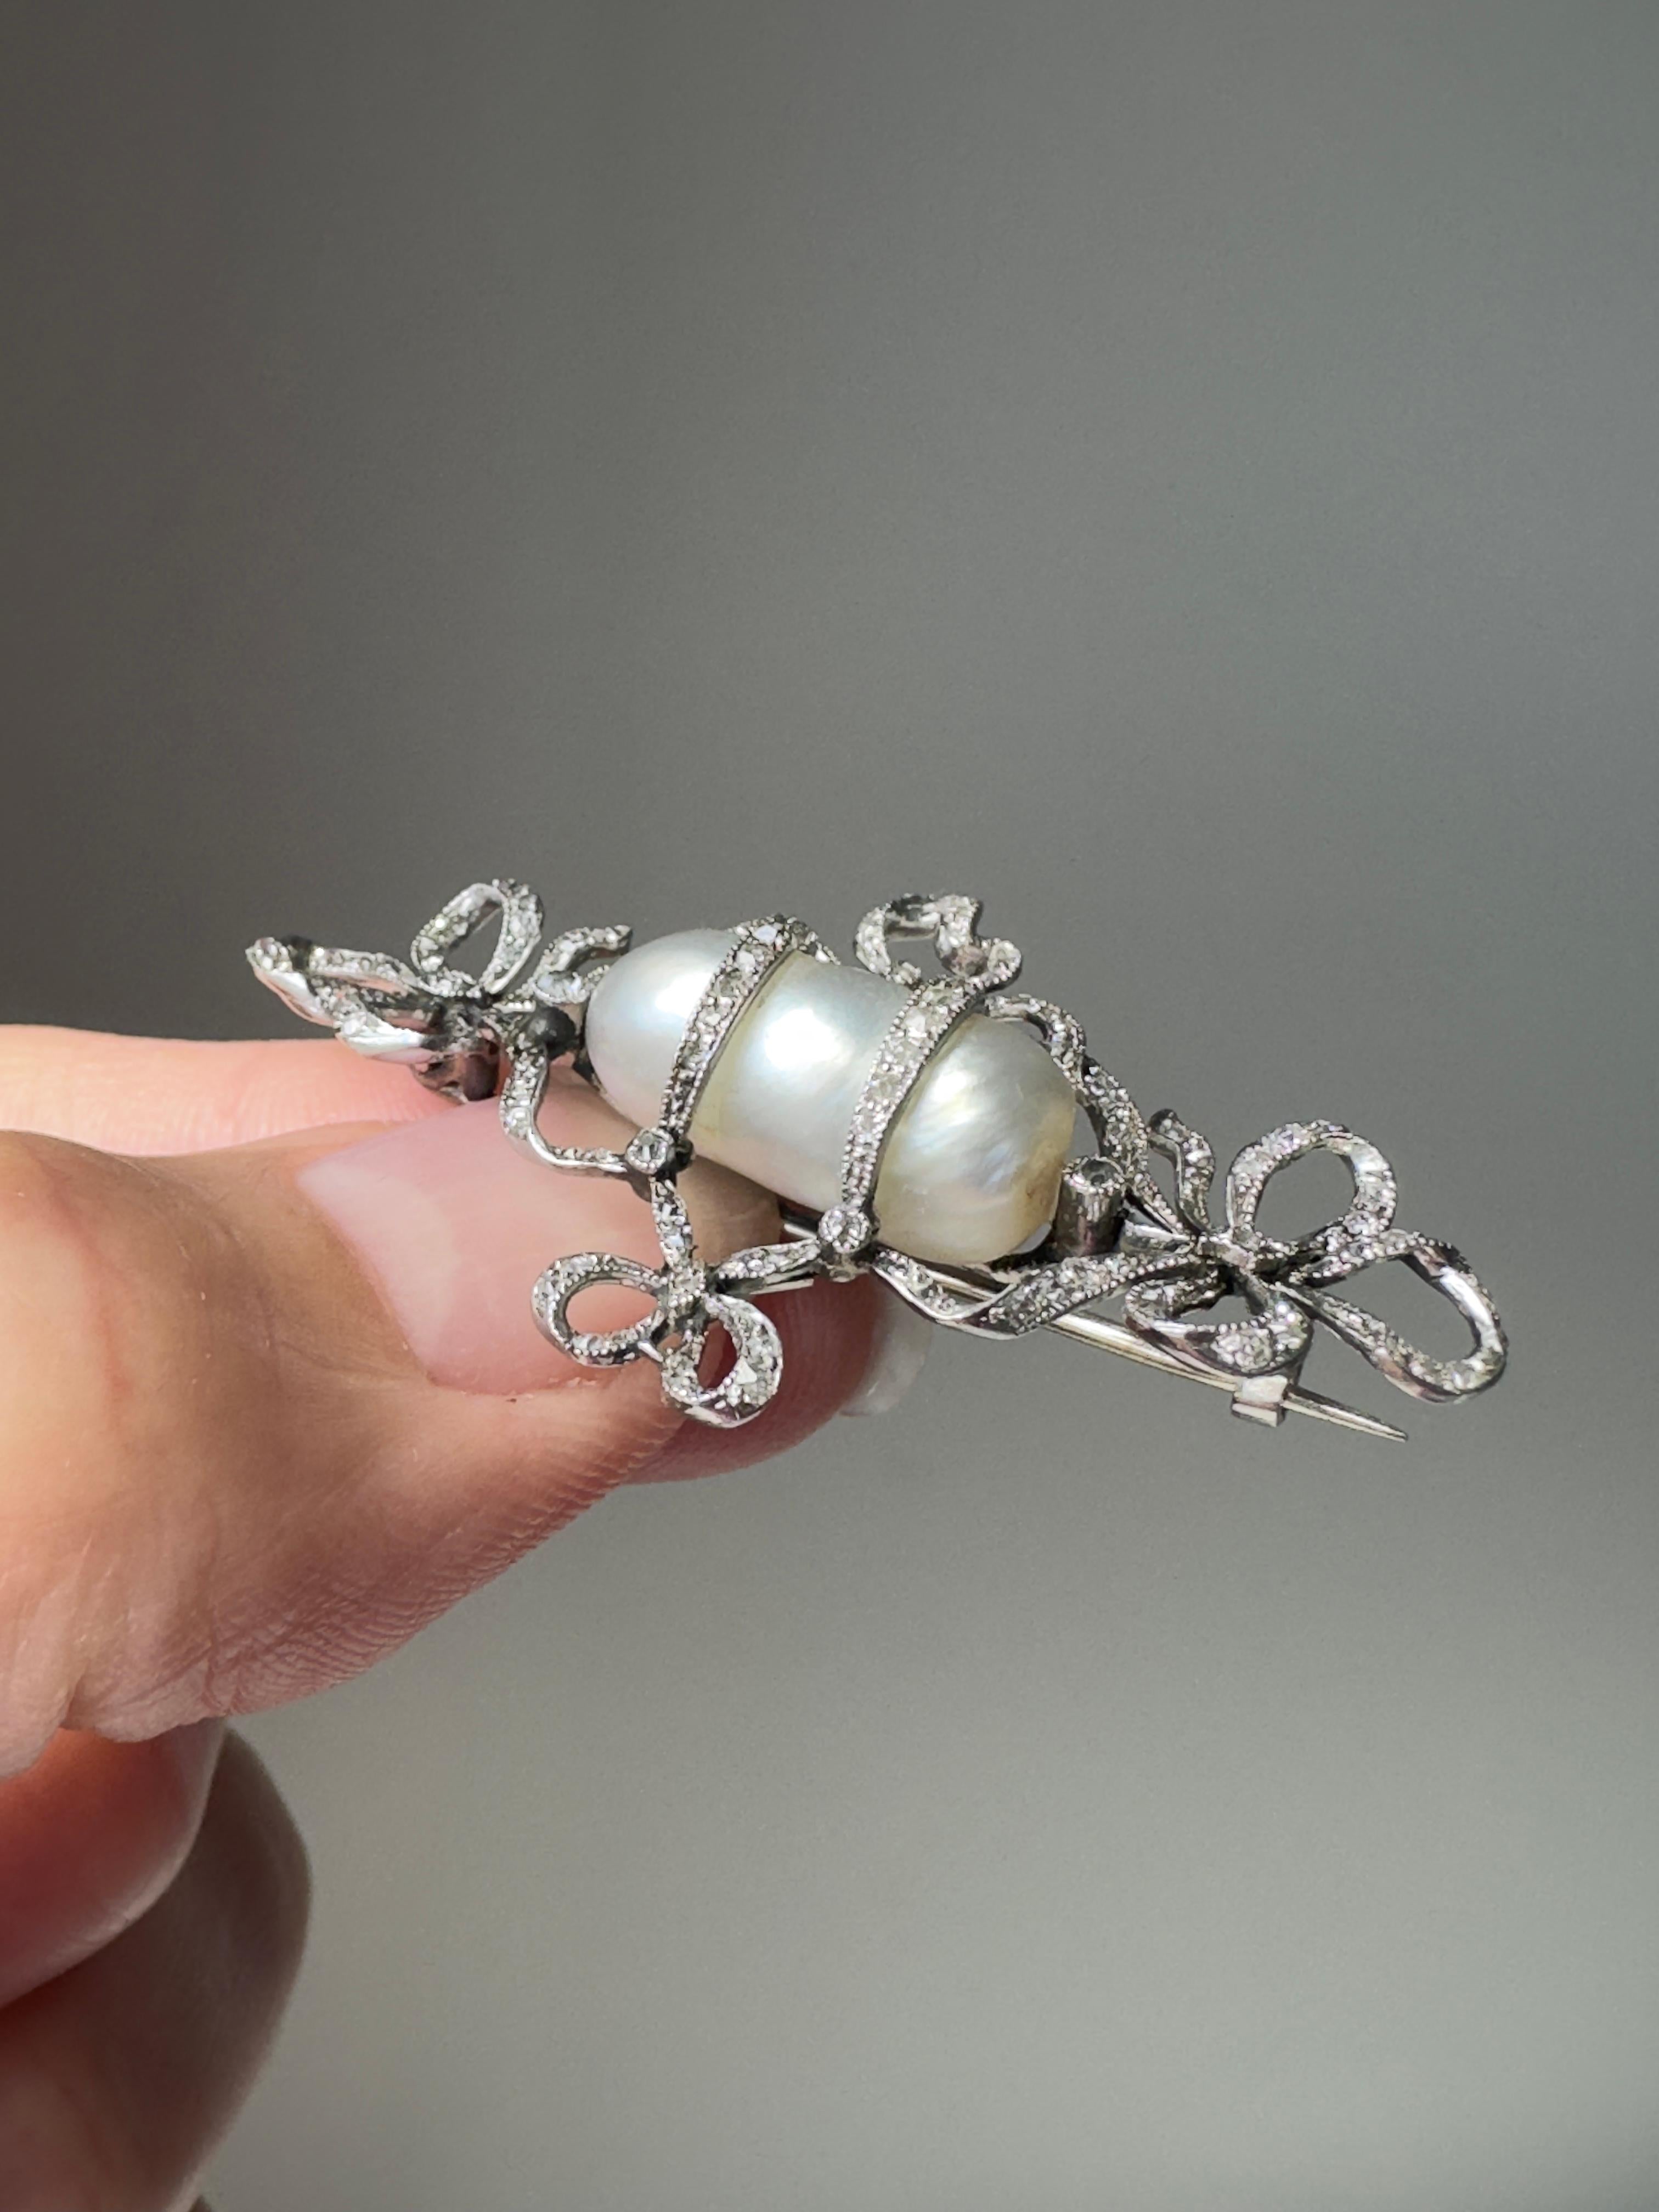 Edwardian Diamond and Natural Pearl Bow Brooch - GIA In Good Condition For Sale In Hummelstown, PA